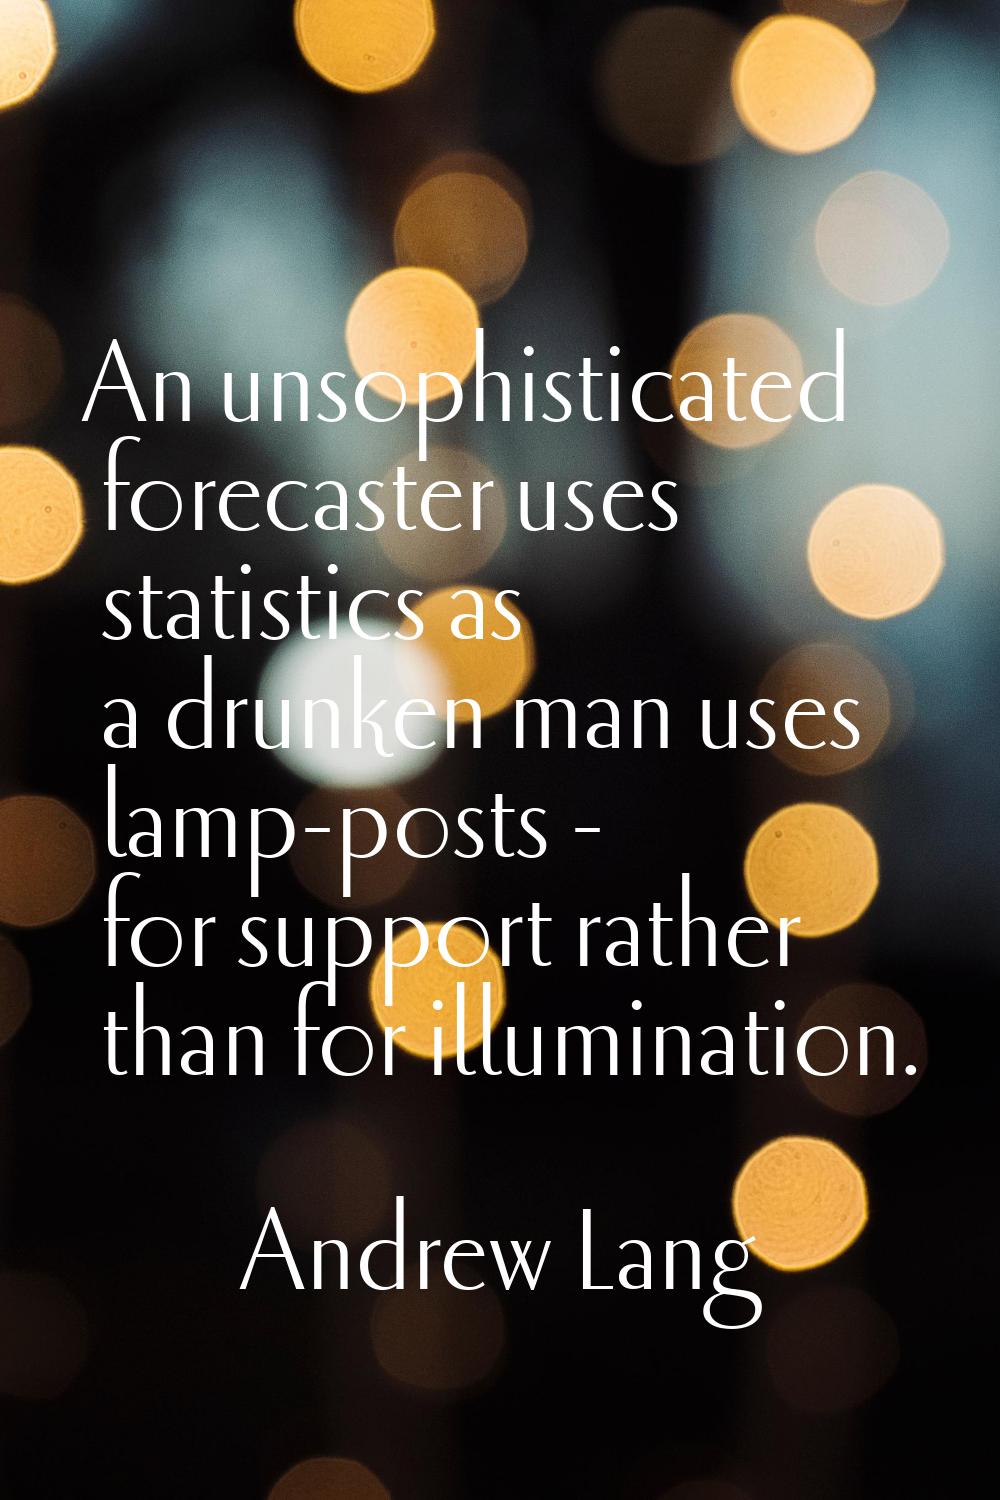 An unsophisticated forecaster uses statistics as a drunken man uses lamp-posts - for support rather